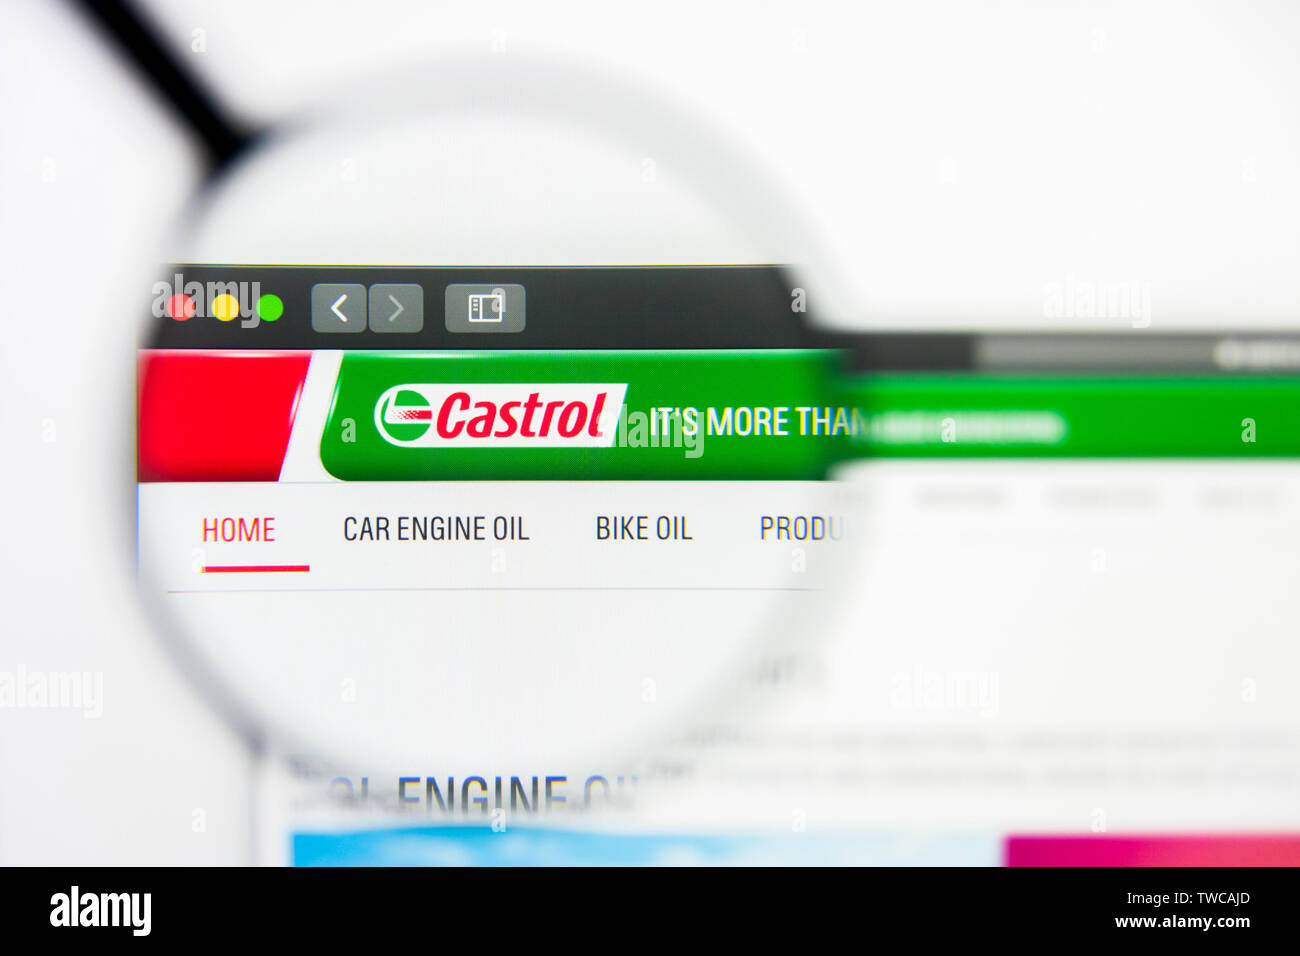 New York, New York State, USA - 19 June 2019: Illustrative Editorial of Castrol India website homepage. Castrol India logo visible on screen. Stock Photo